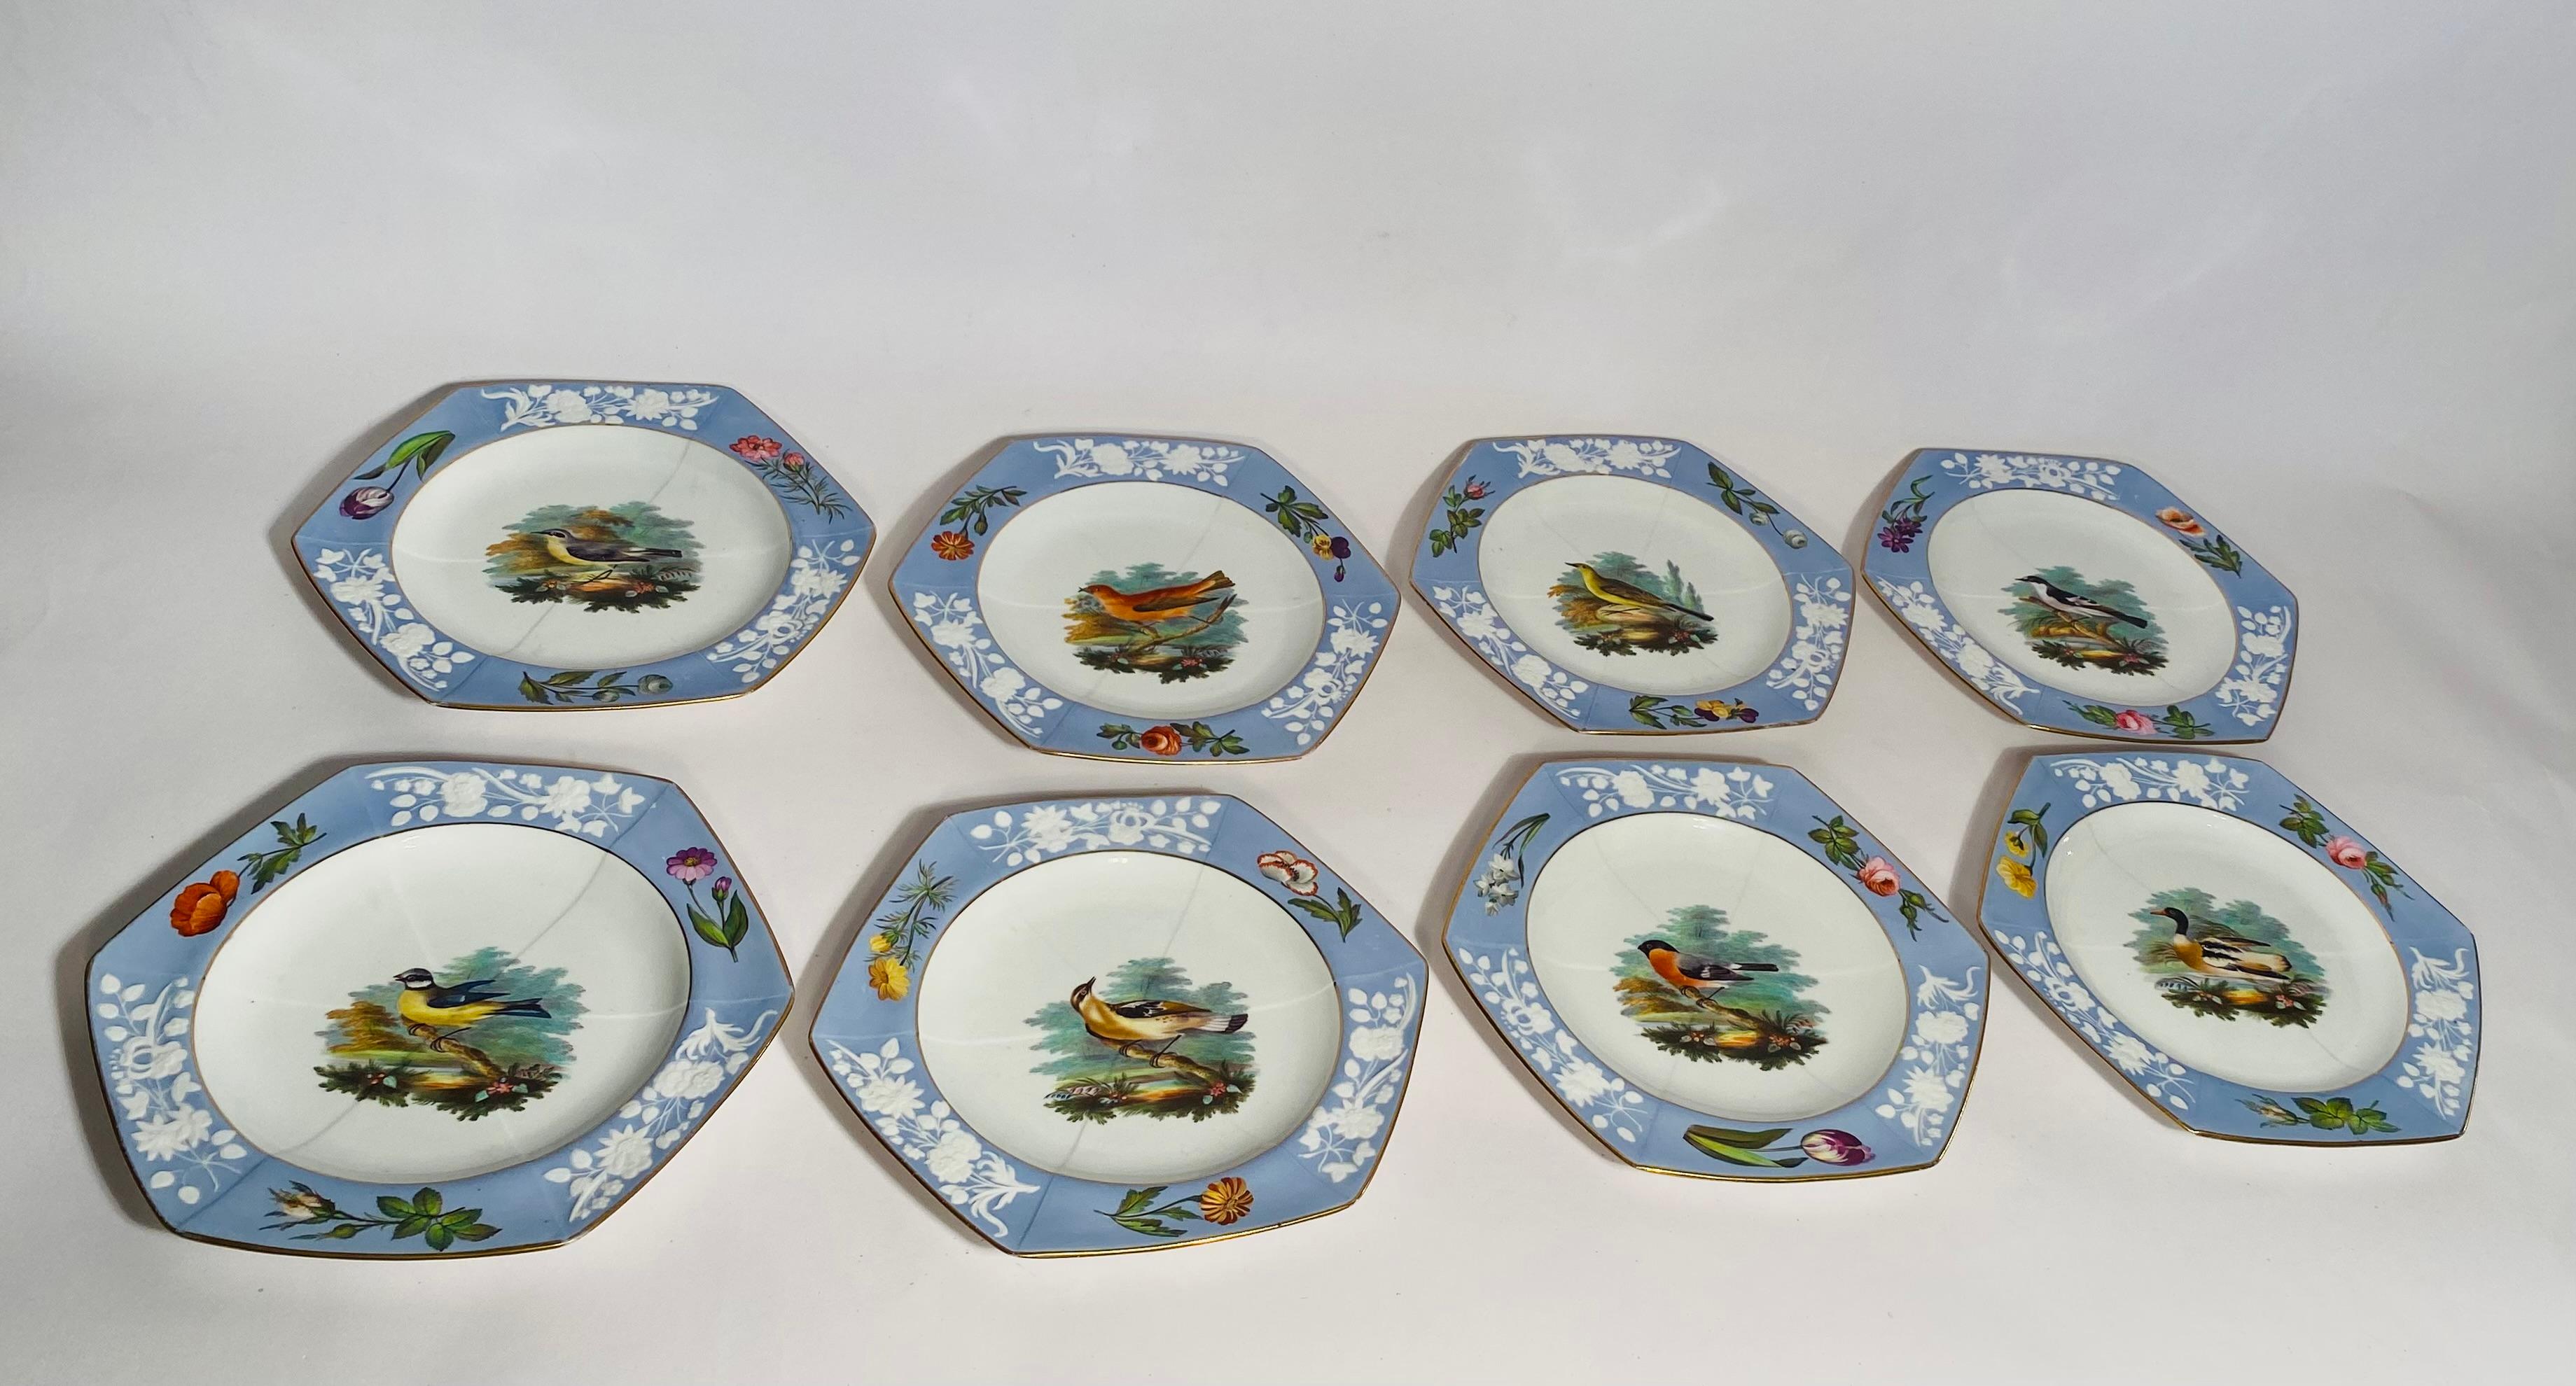 Antique English Periwinkle Blue Dessert Service for 16, Spode Circa 1820  For Sale 5